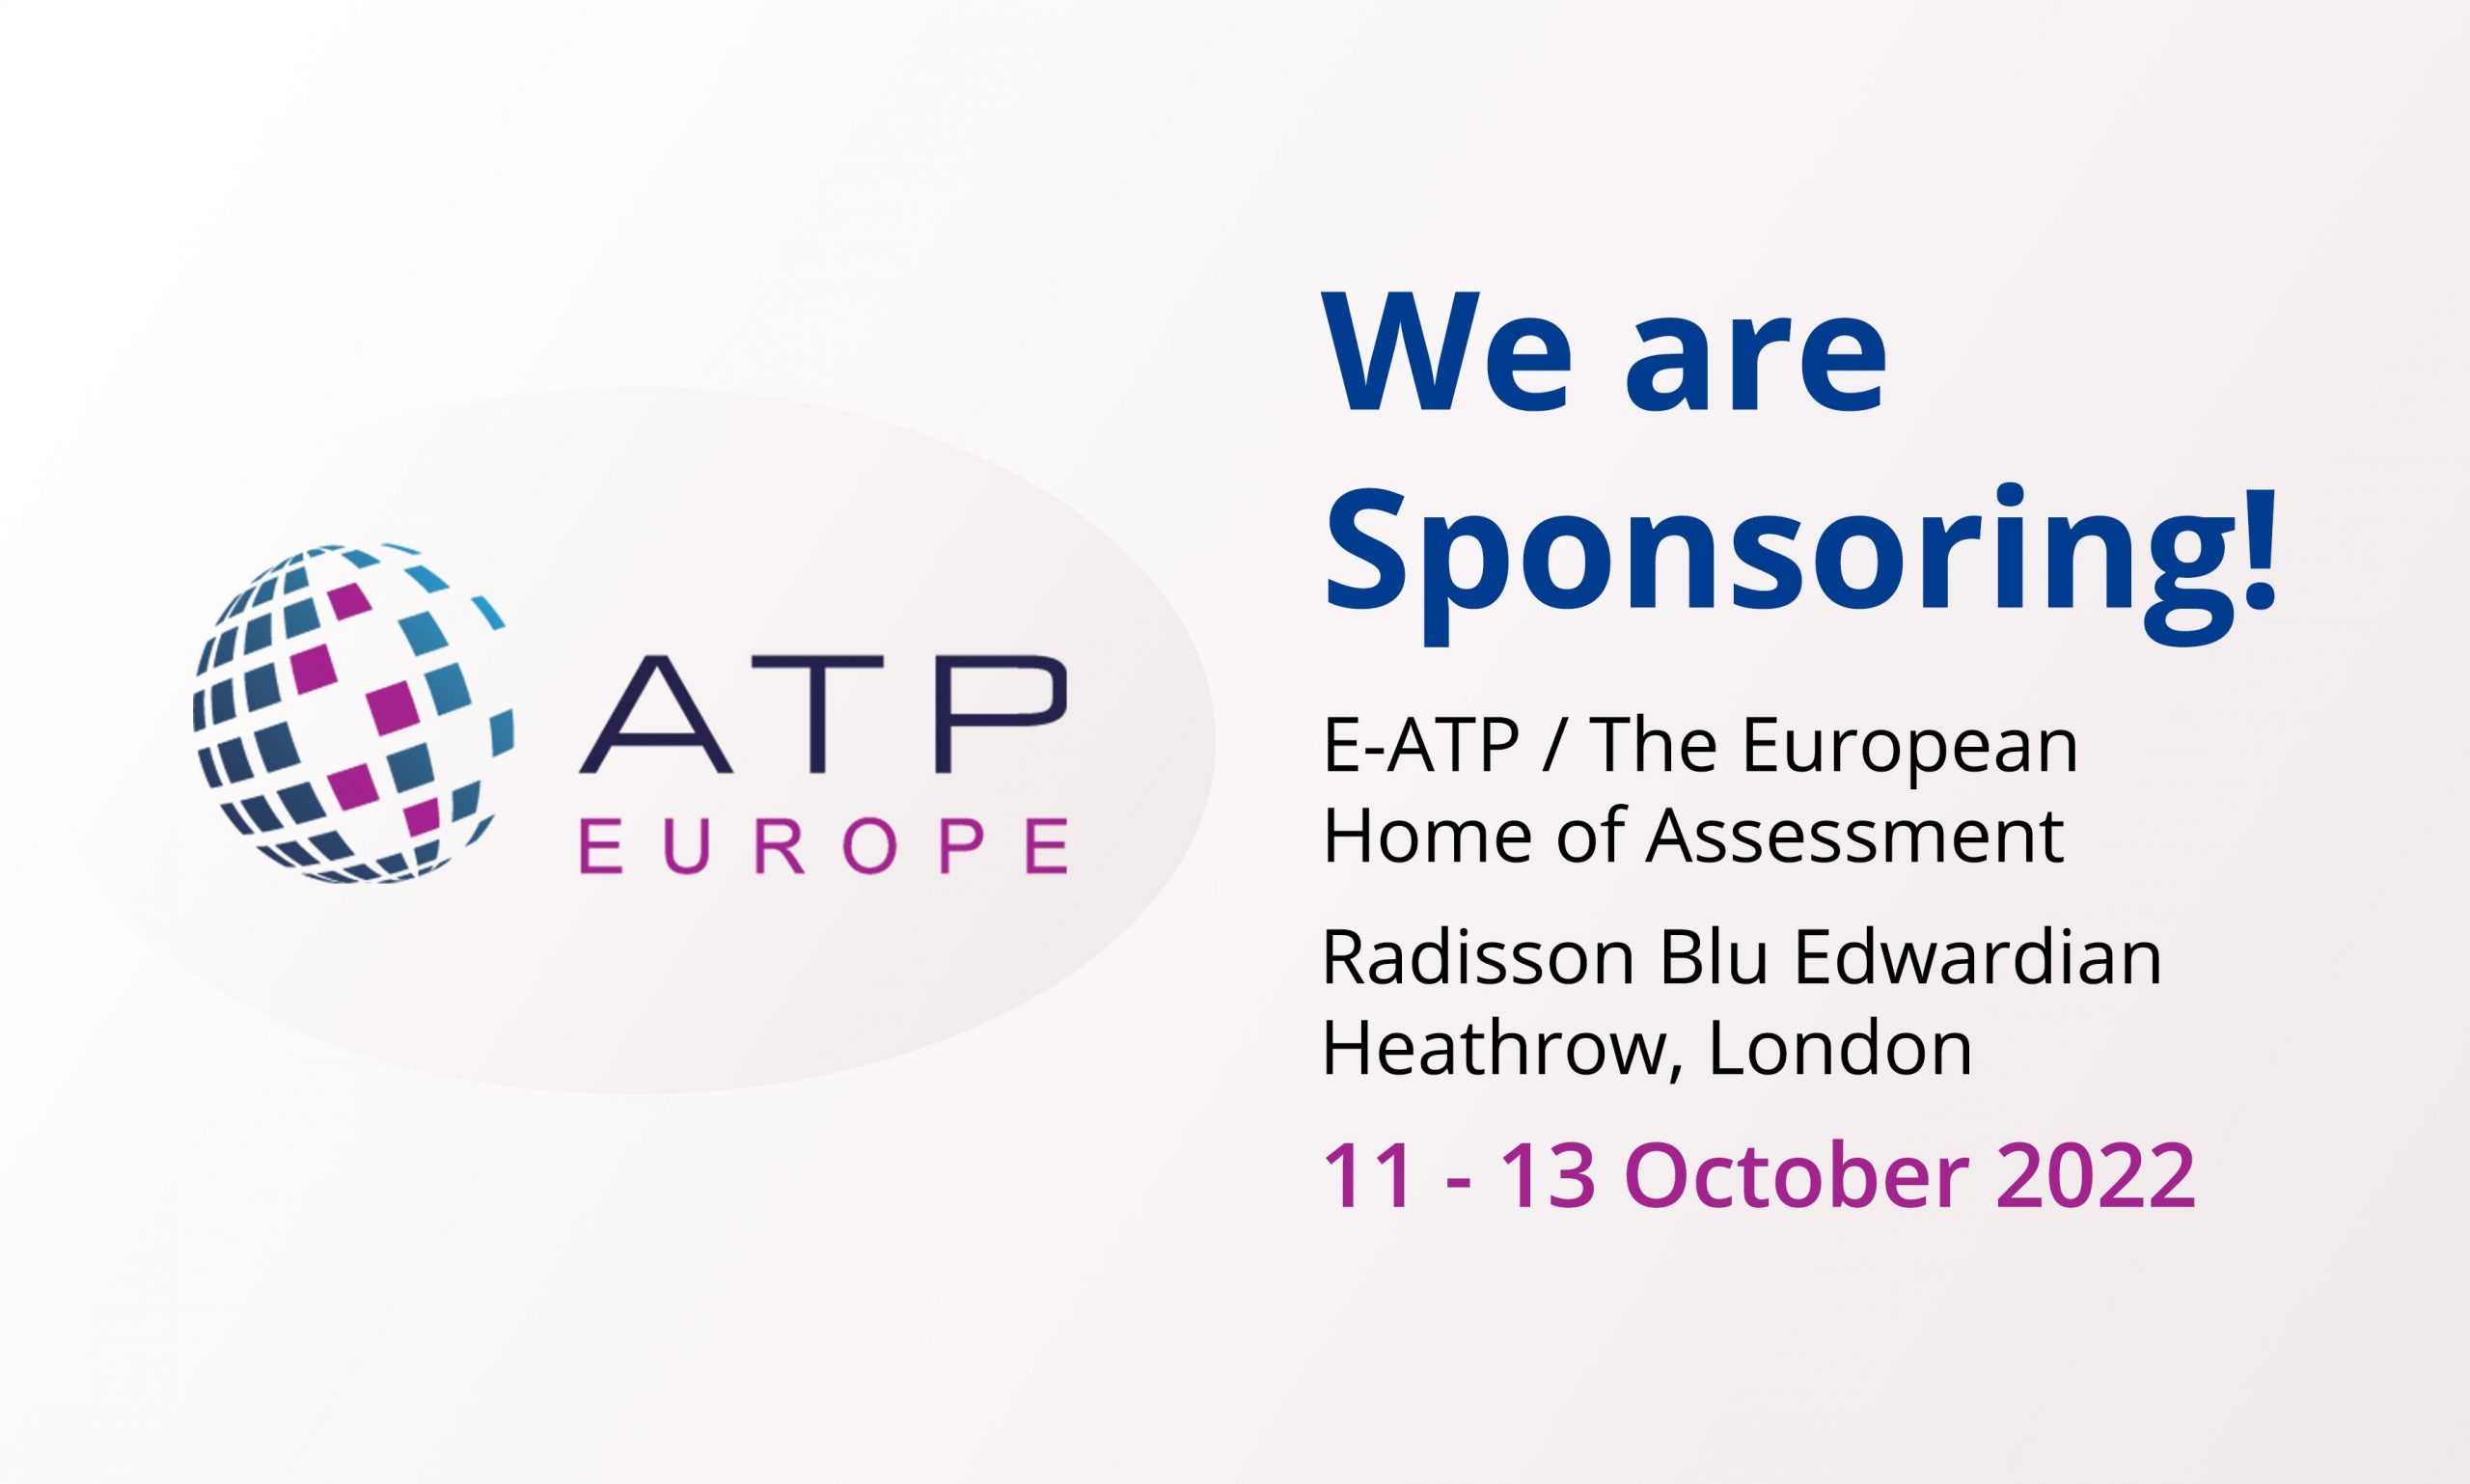 ATP Europe conference taking place at the Radisson Blu Edwardian Heathrow, London on 11 – 13 October 2022